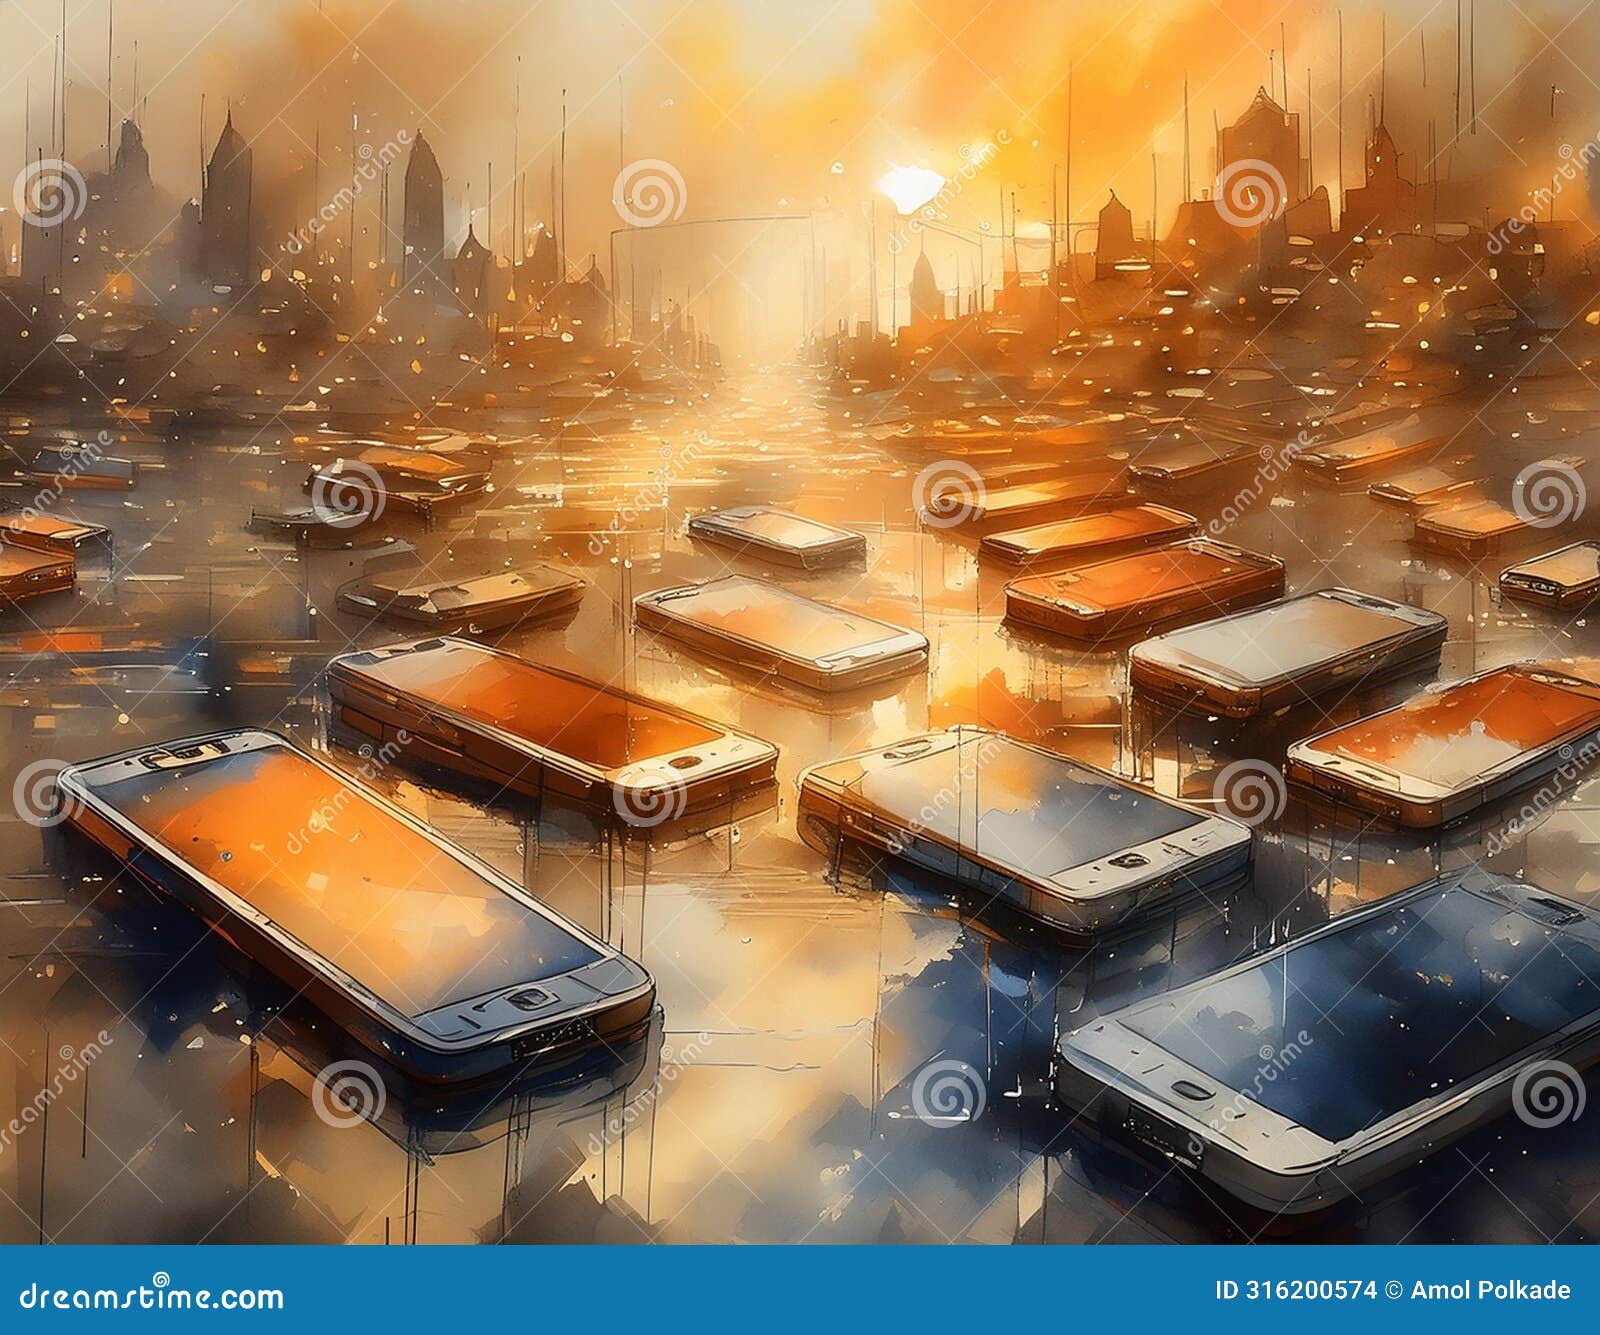 thousand of mobiles on water abstract watercolor hand painted background, di